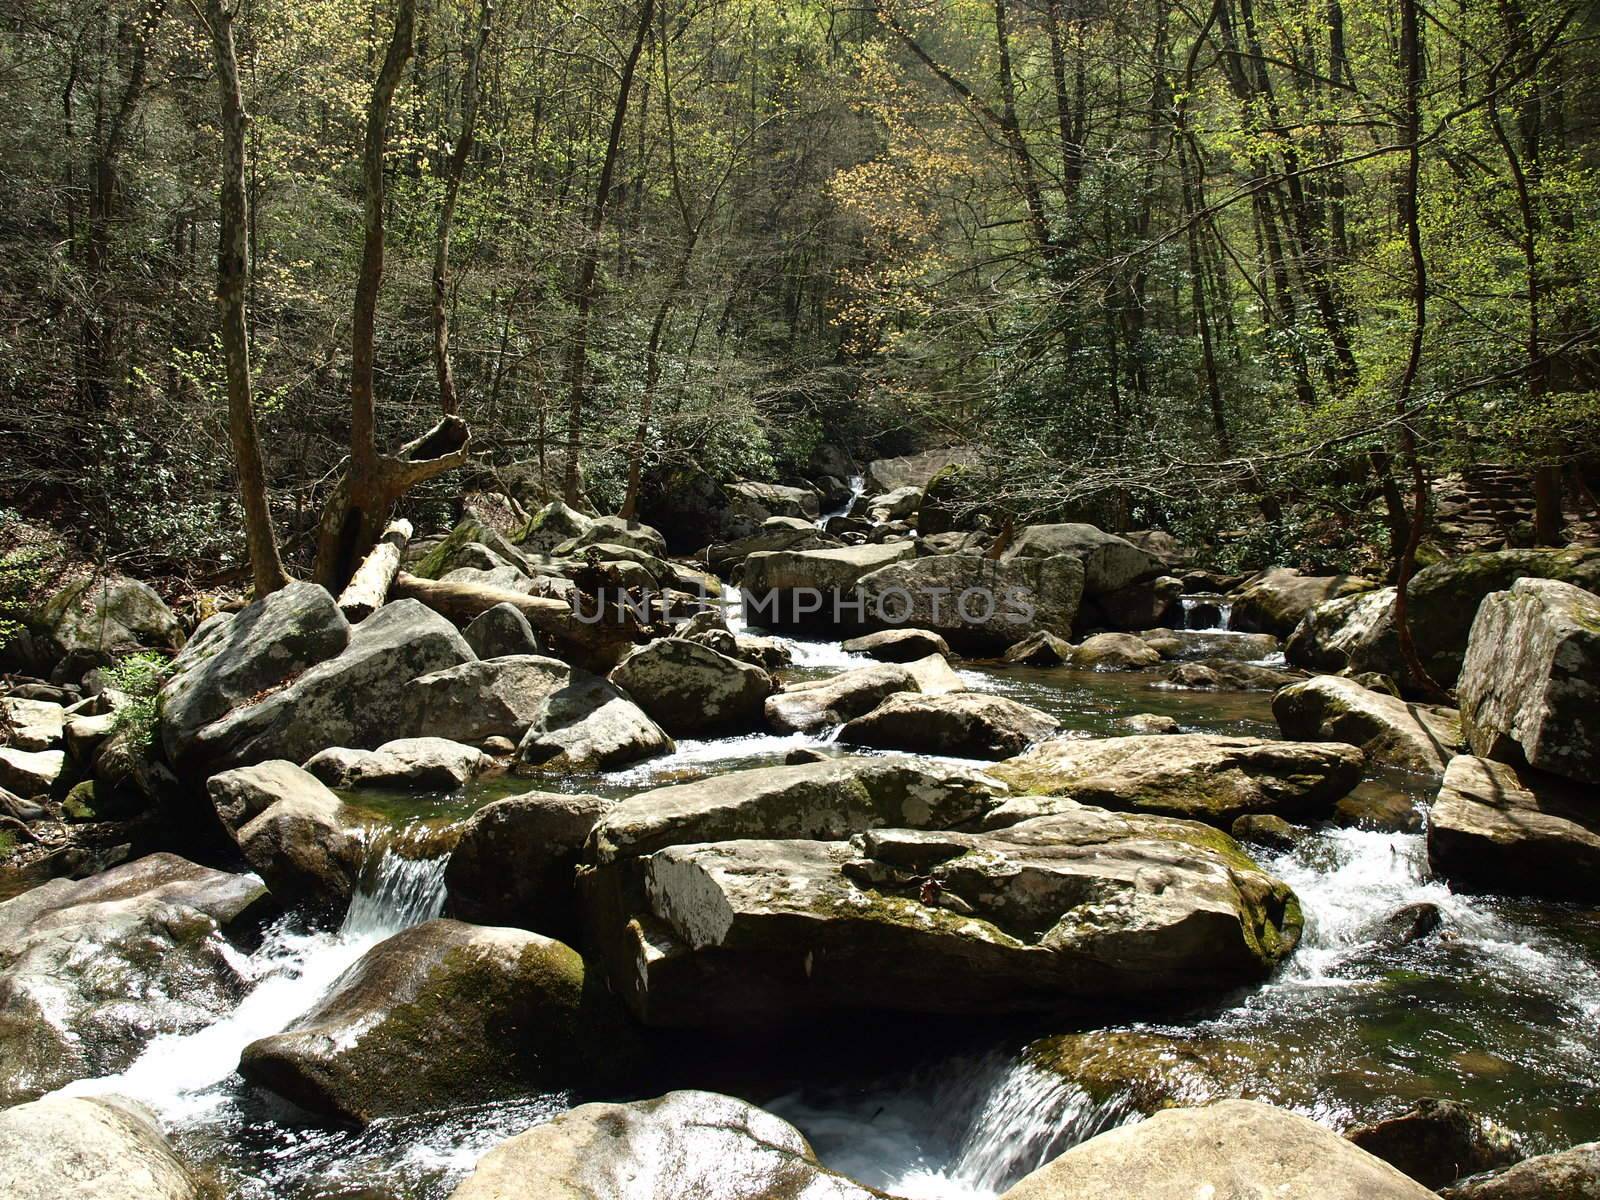 Jacobs Fork River in the spring of the year. The river is located in North Carolina.